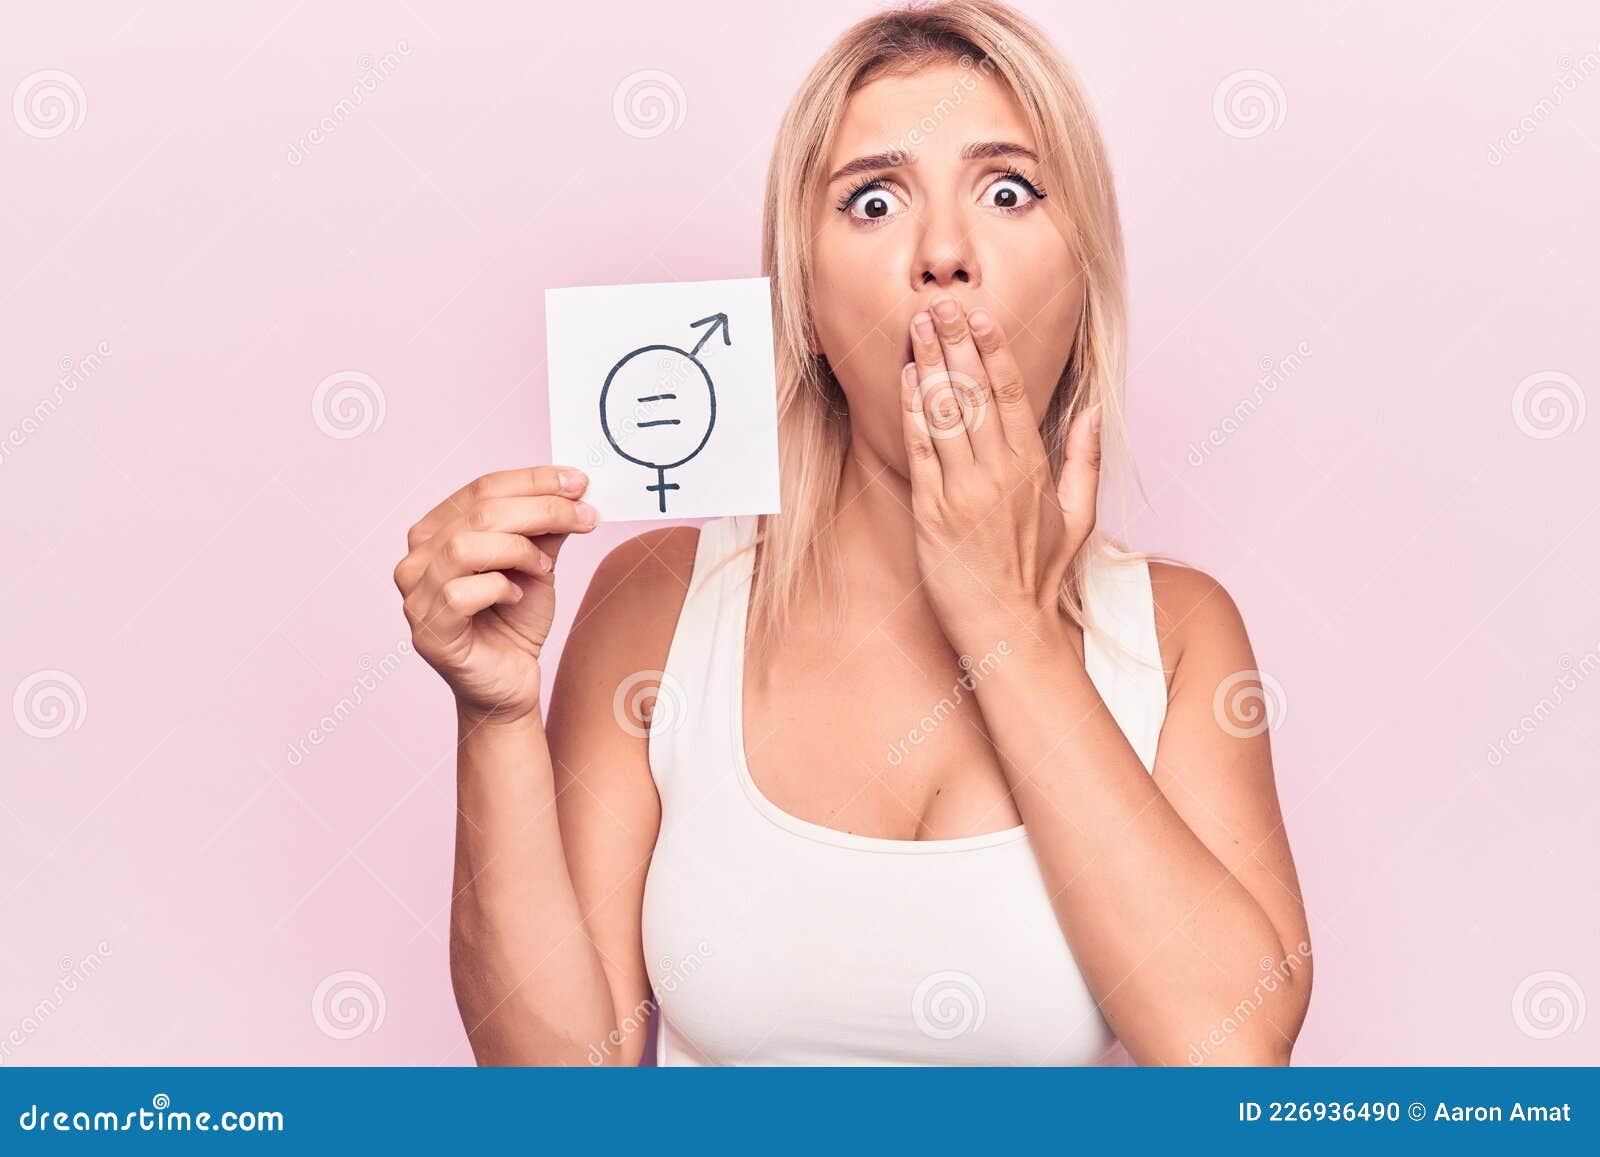 Young Blonde Woman Asking for Sex Discrimination Holding Paper with Gender Equality Message Covering Mouth with Hand, Shocked and Stock Photo image